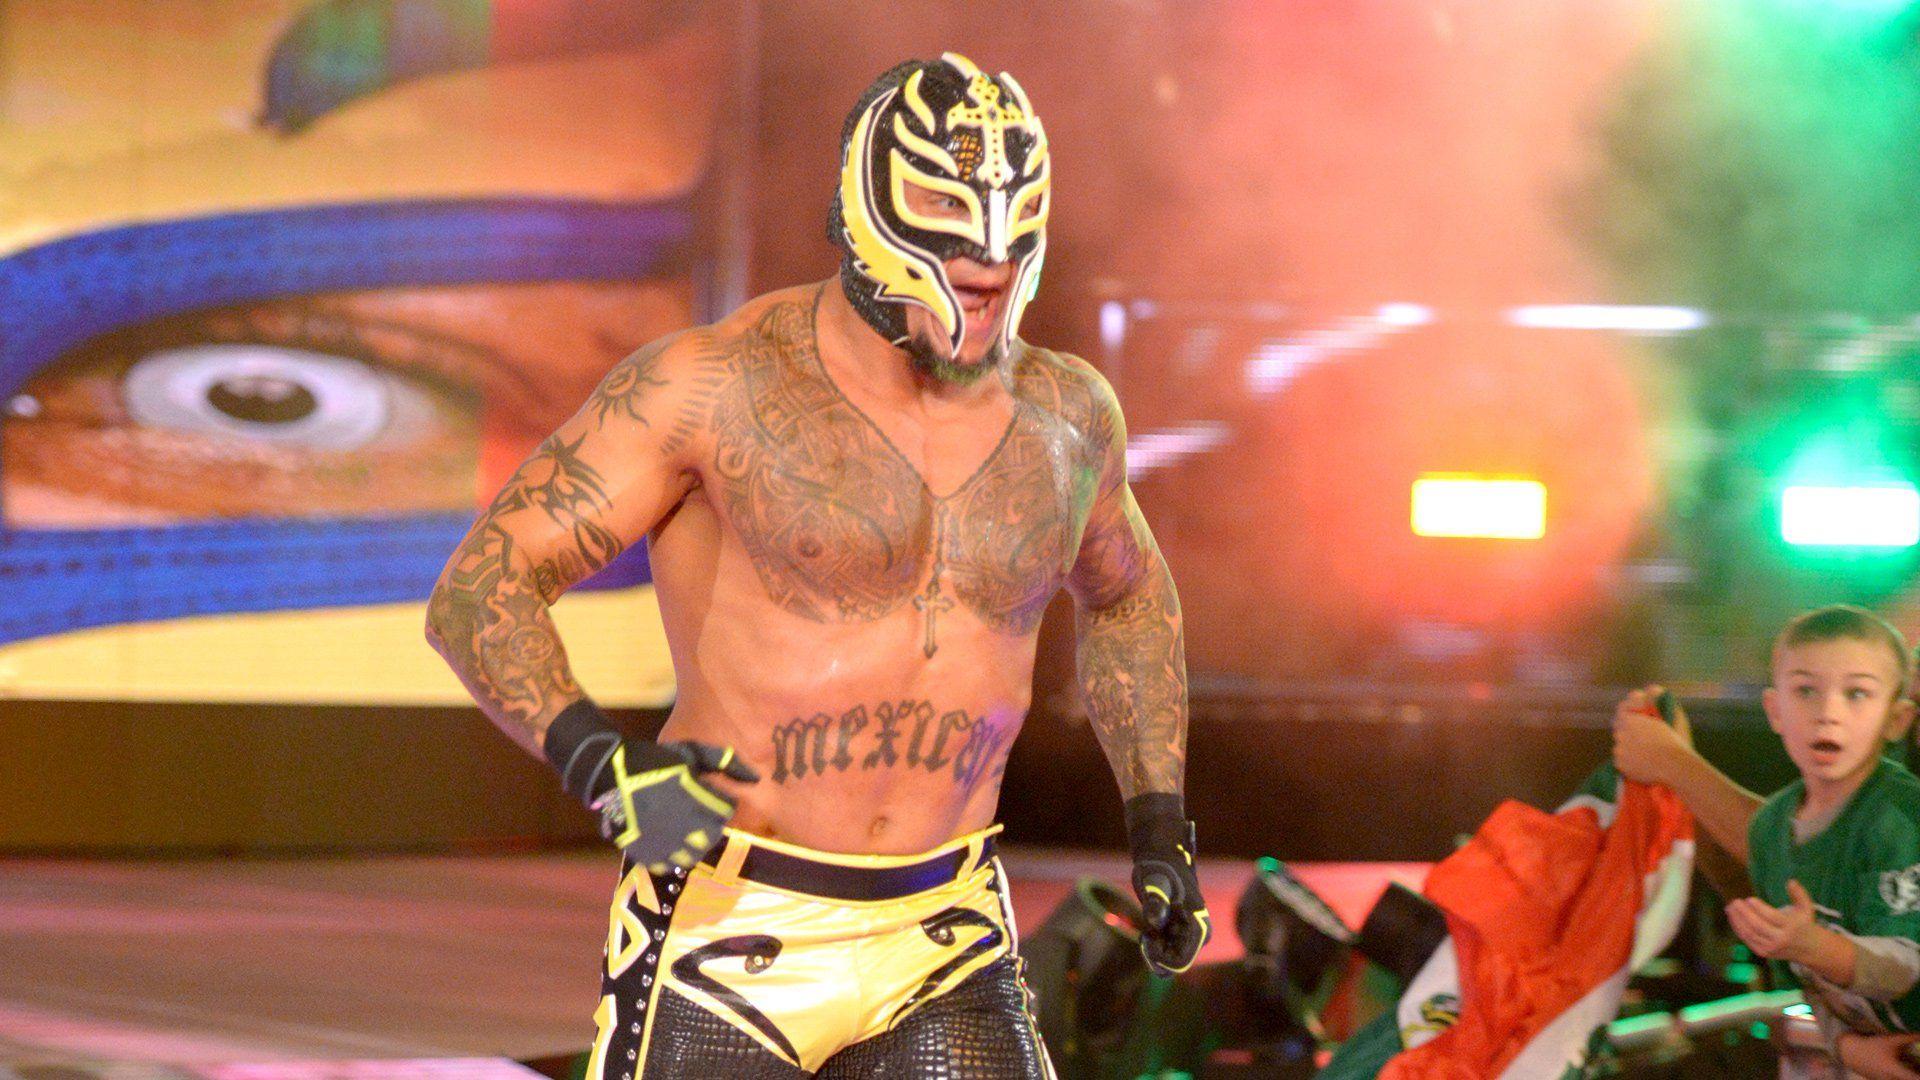 Rey Mysterio makes a shocking return in the Royal Rumble Match